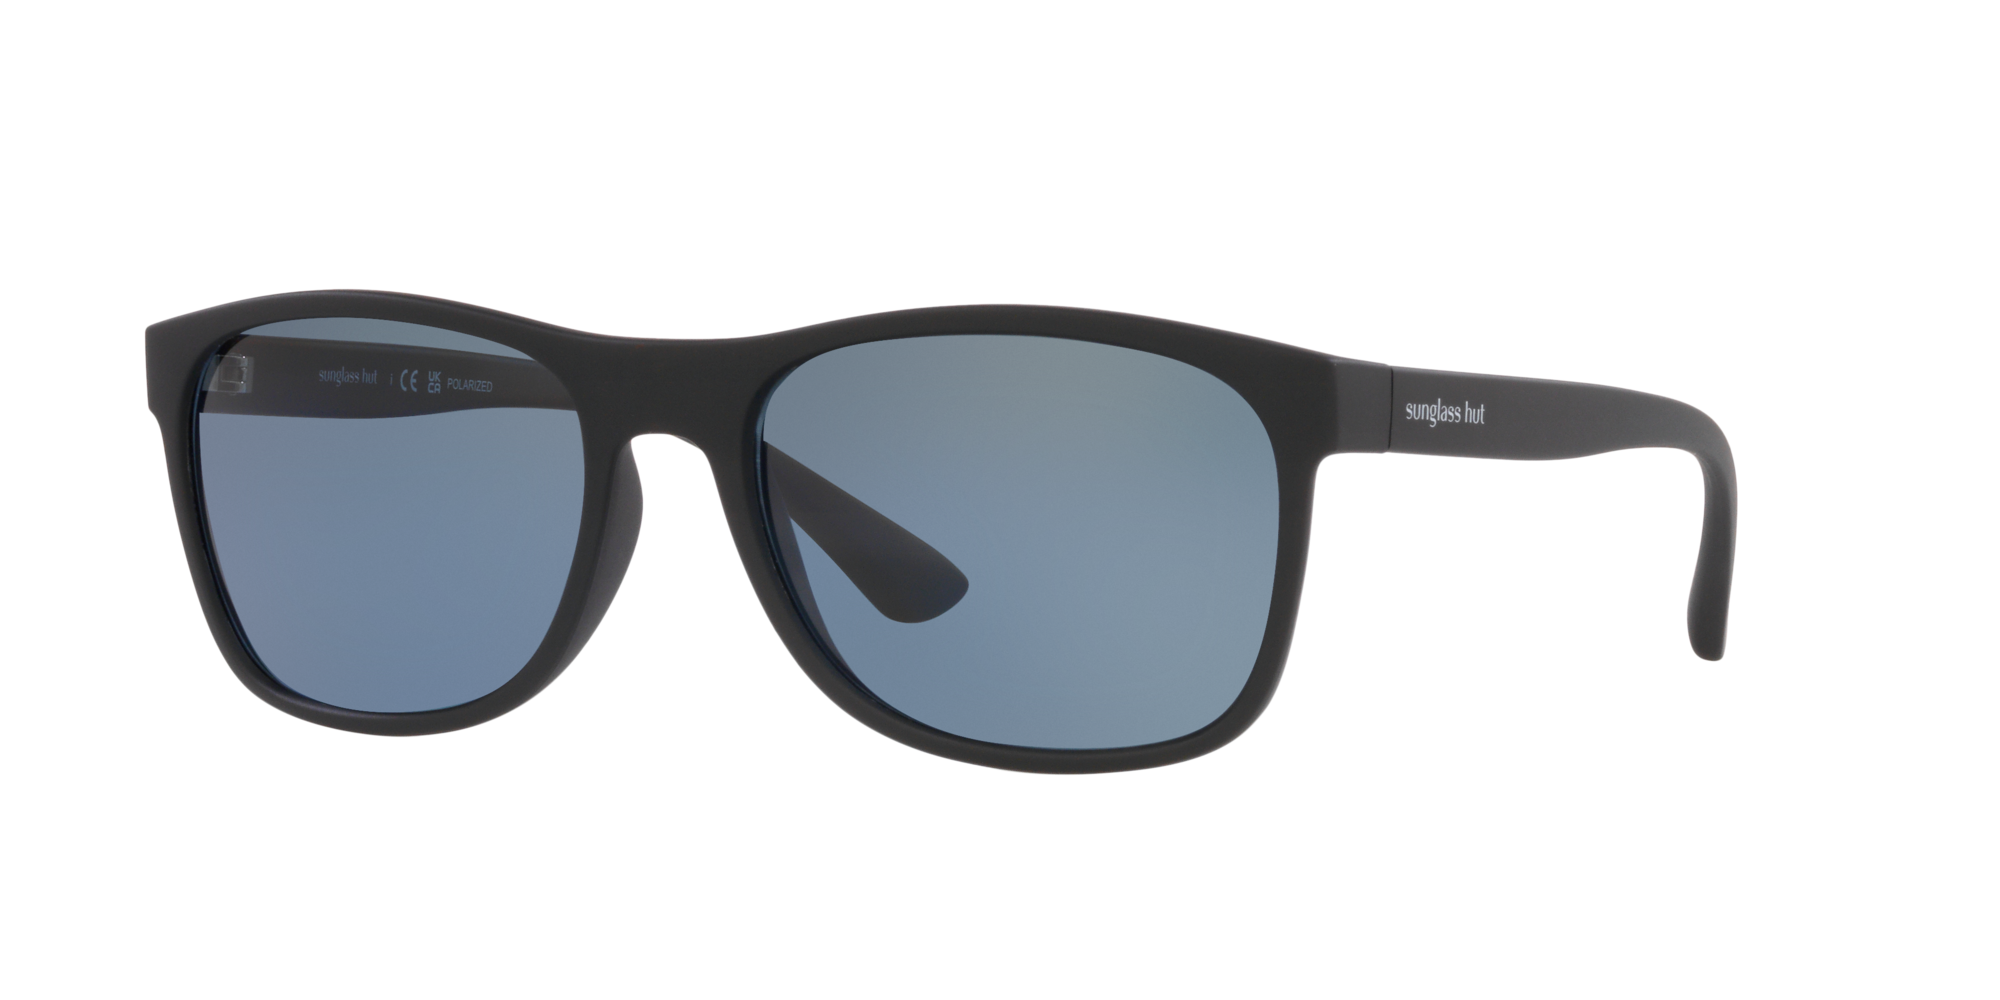 Aviator sunglasses Ray-Ban Sunglass Hut, colorful sunglasses, clothing  Accessories, glasses png | PNGEgg